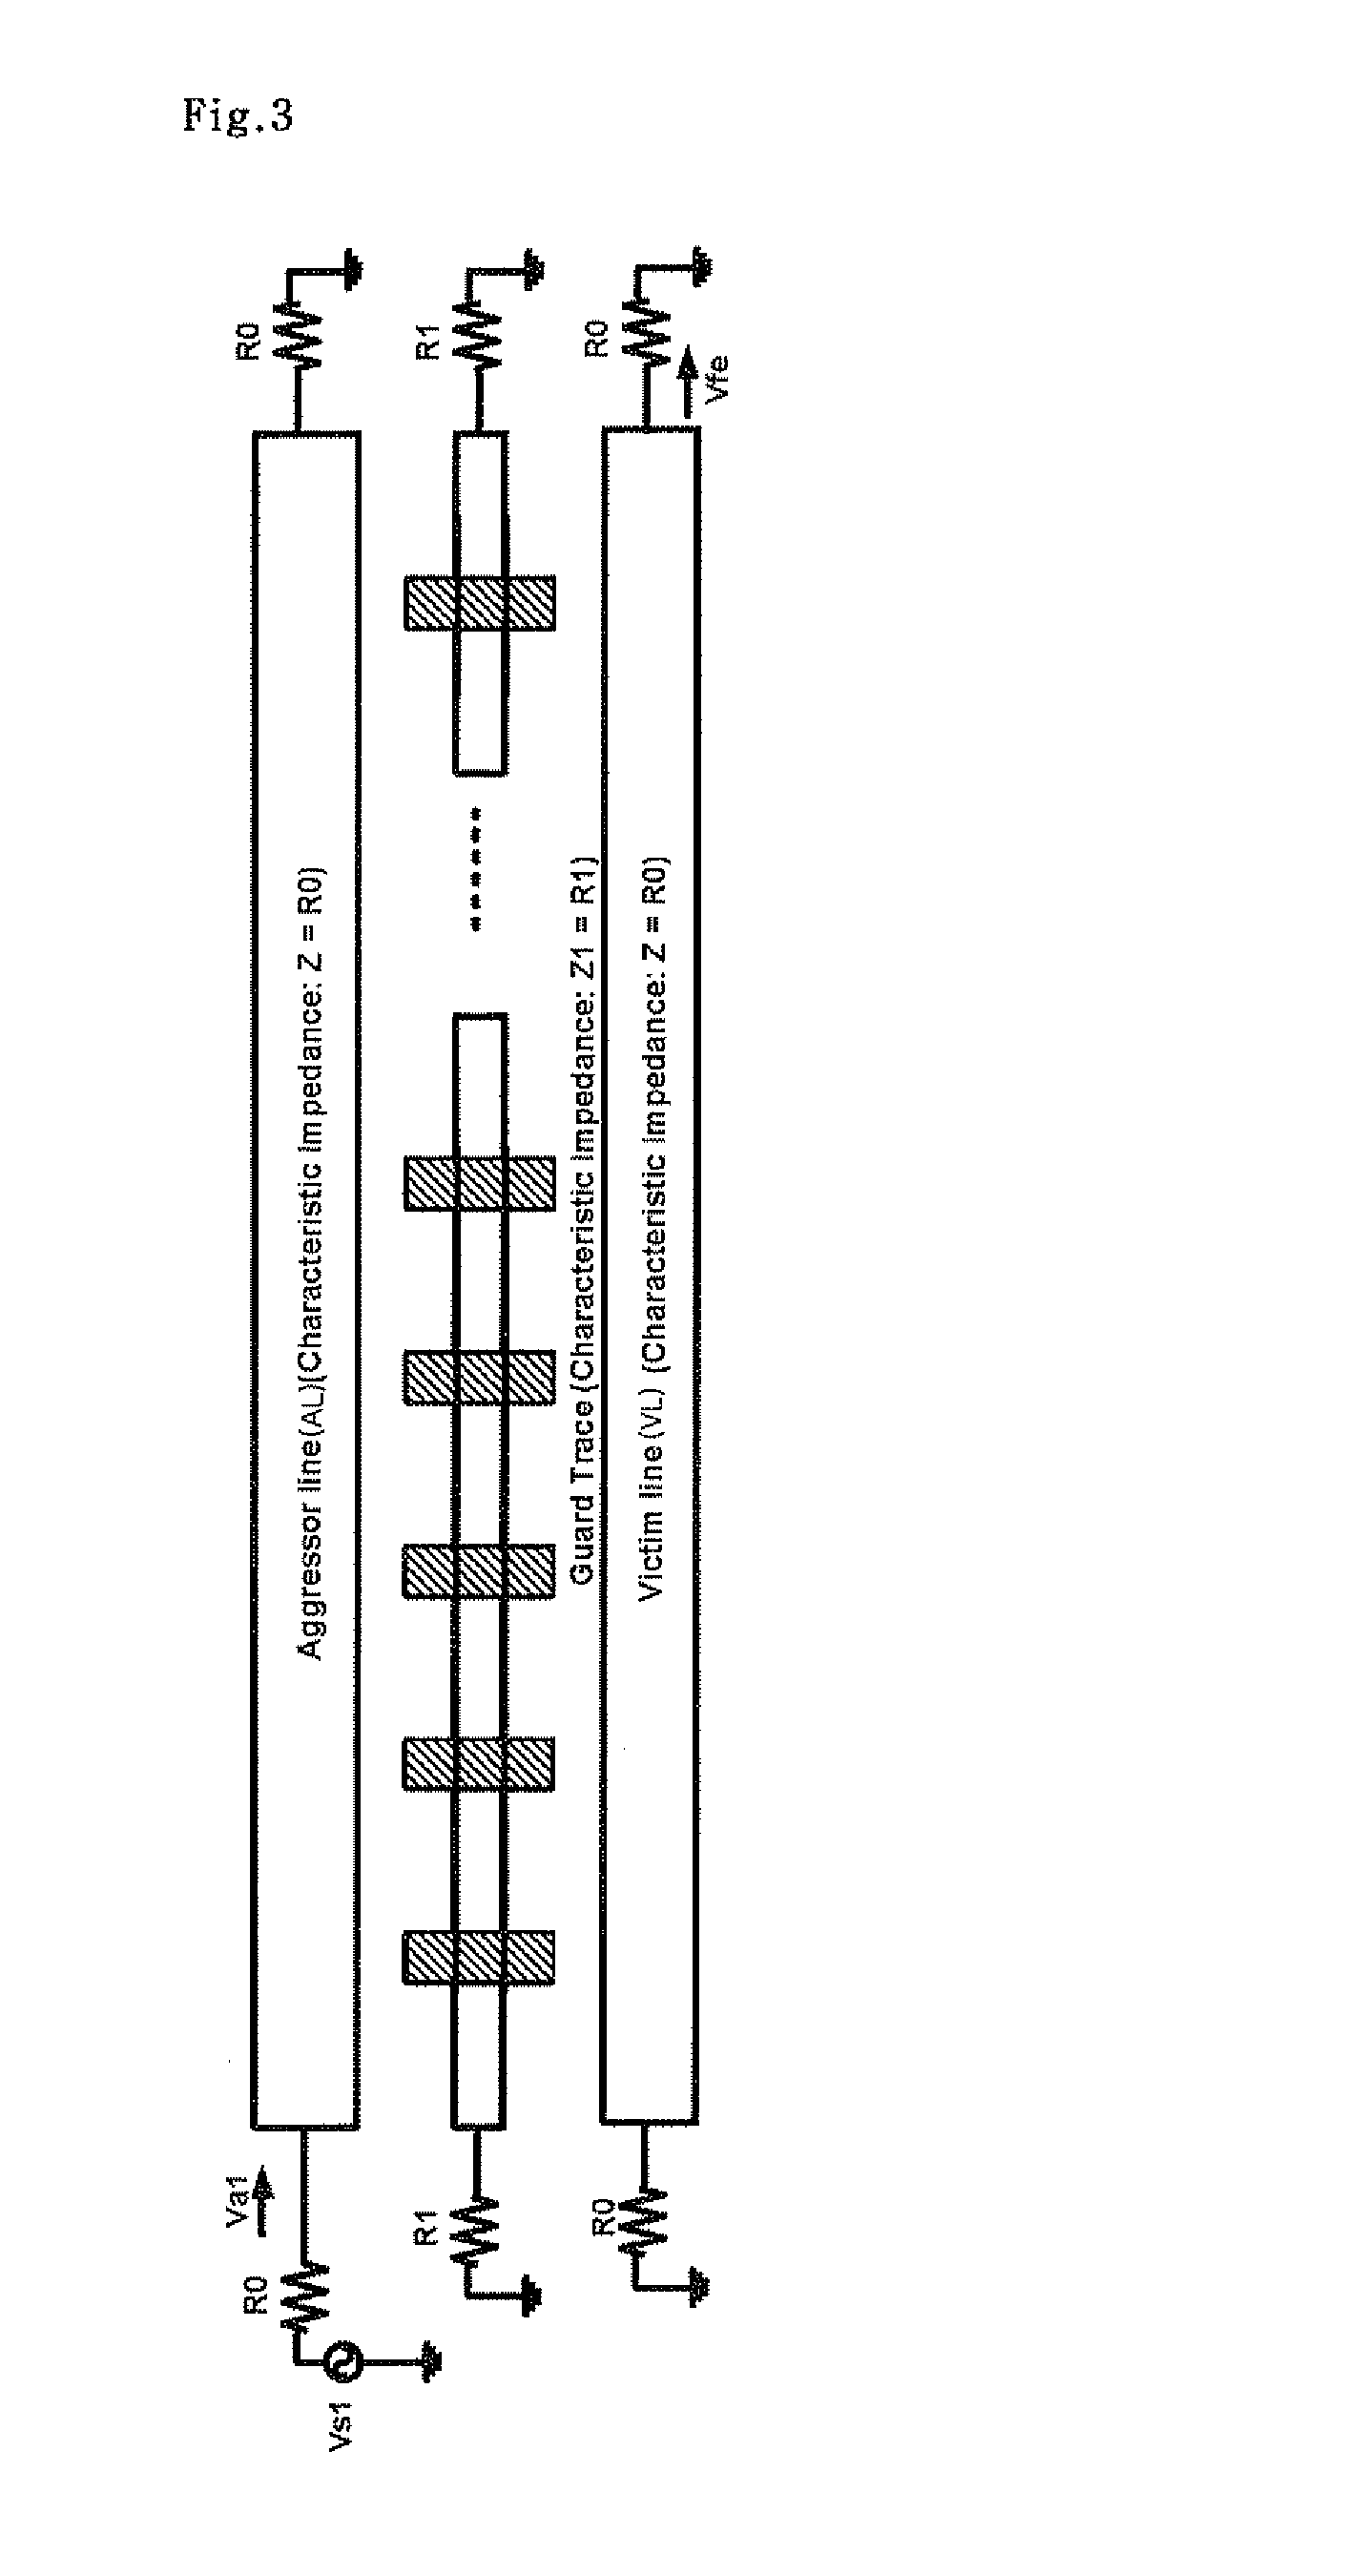 Double comb guard trace pattern for reducing the far-end cross-talk and printed circuit board including the pattern